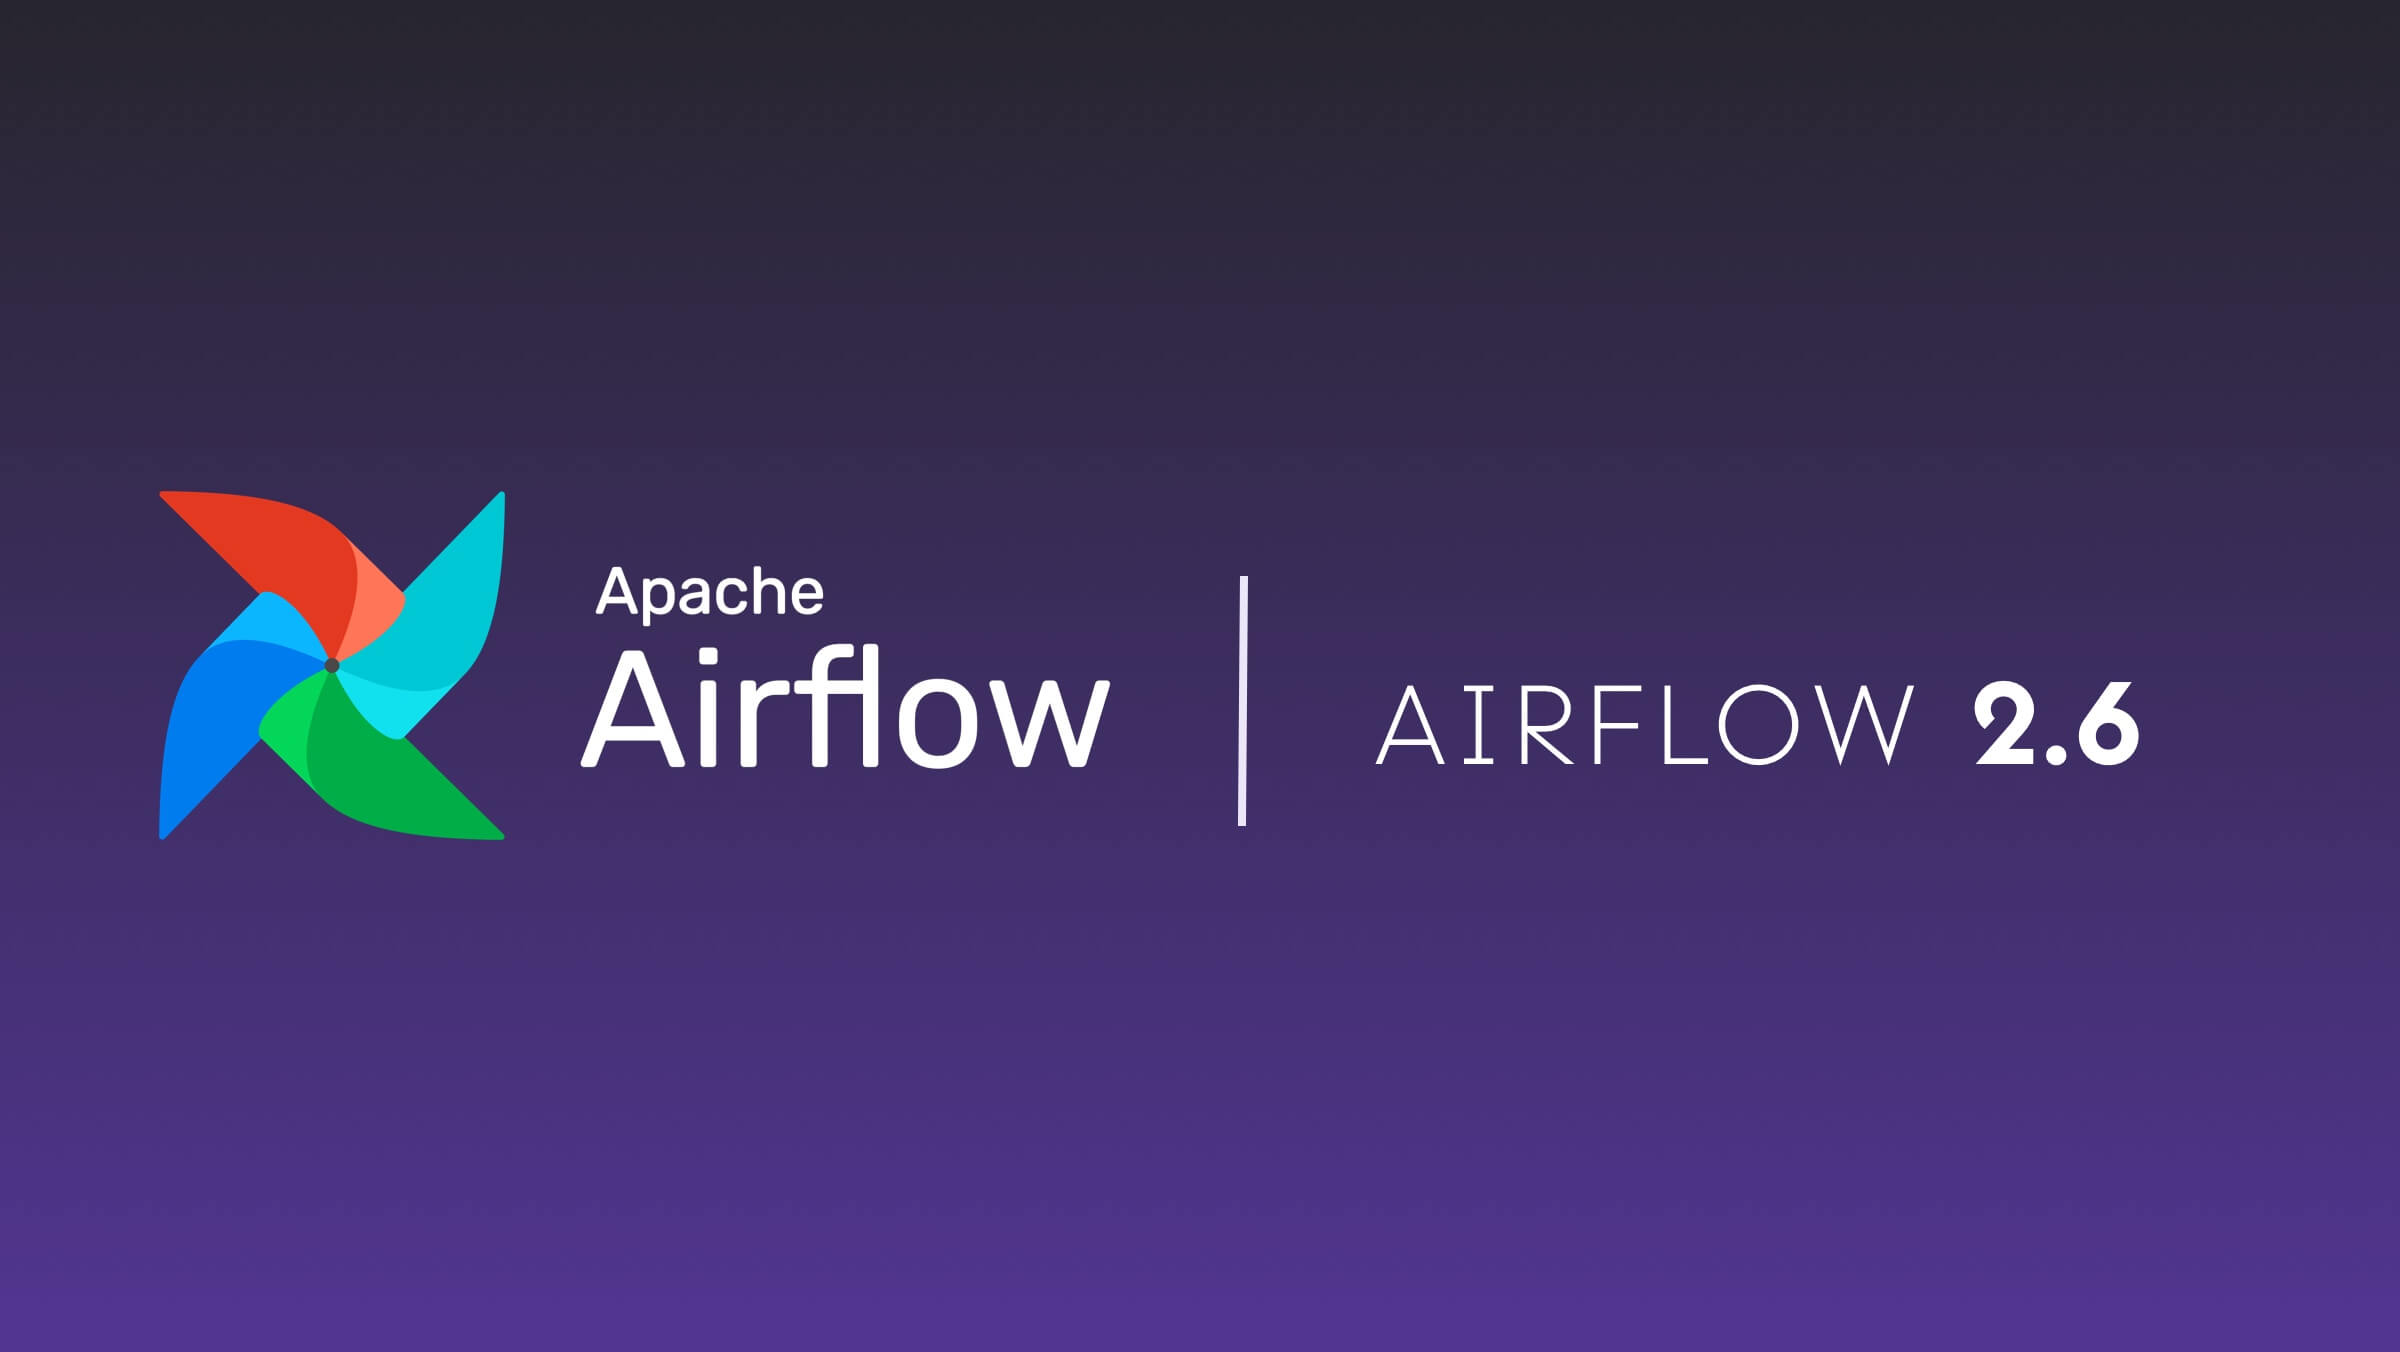 Introducing Airflow 2.6